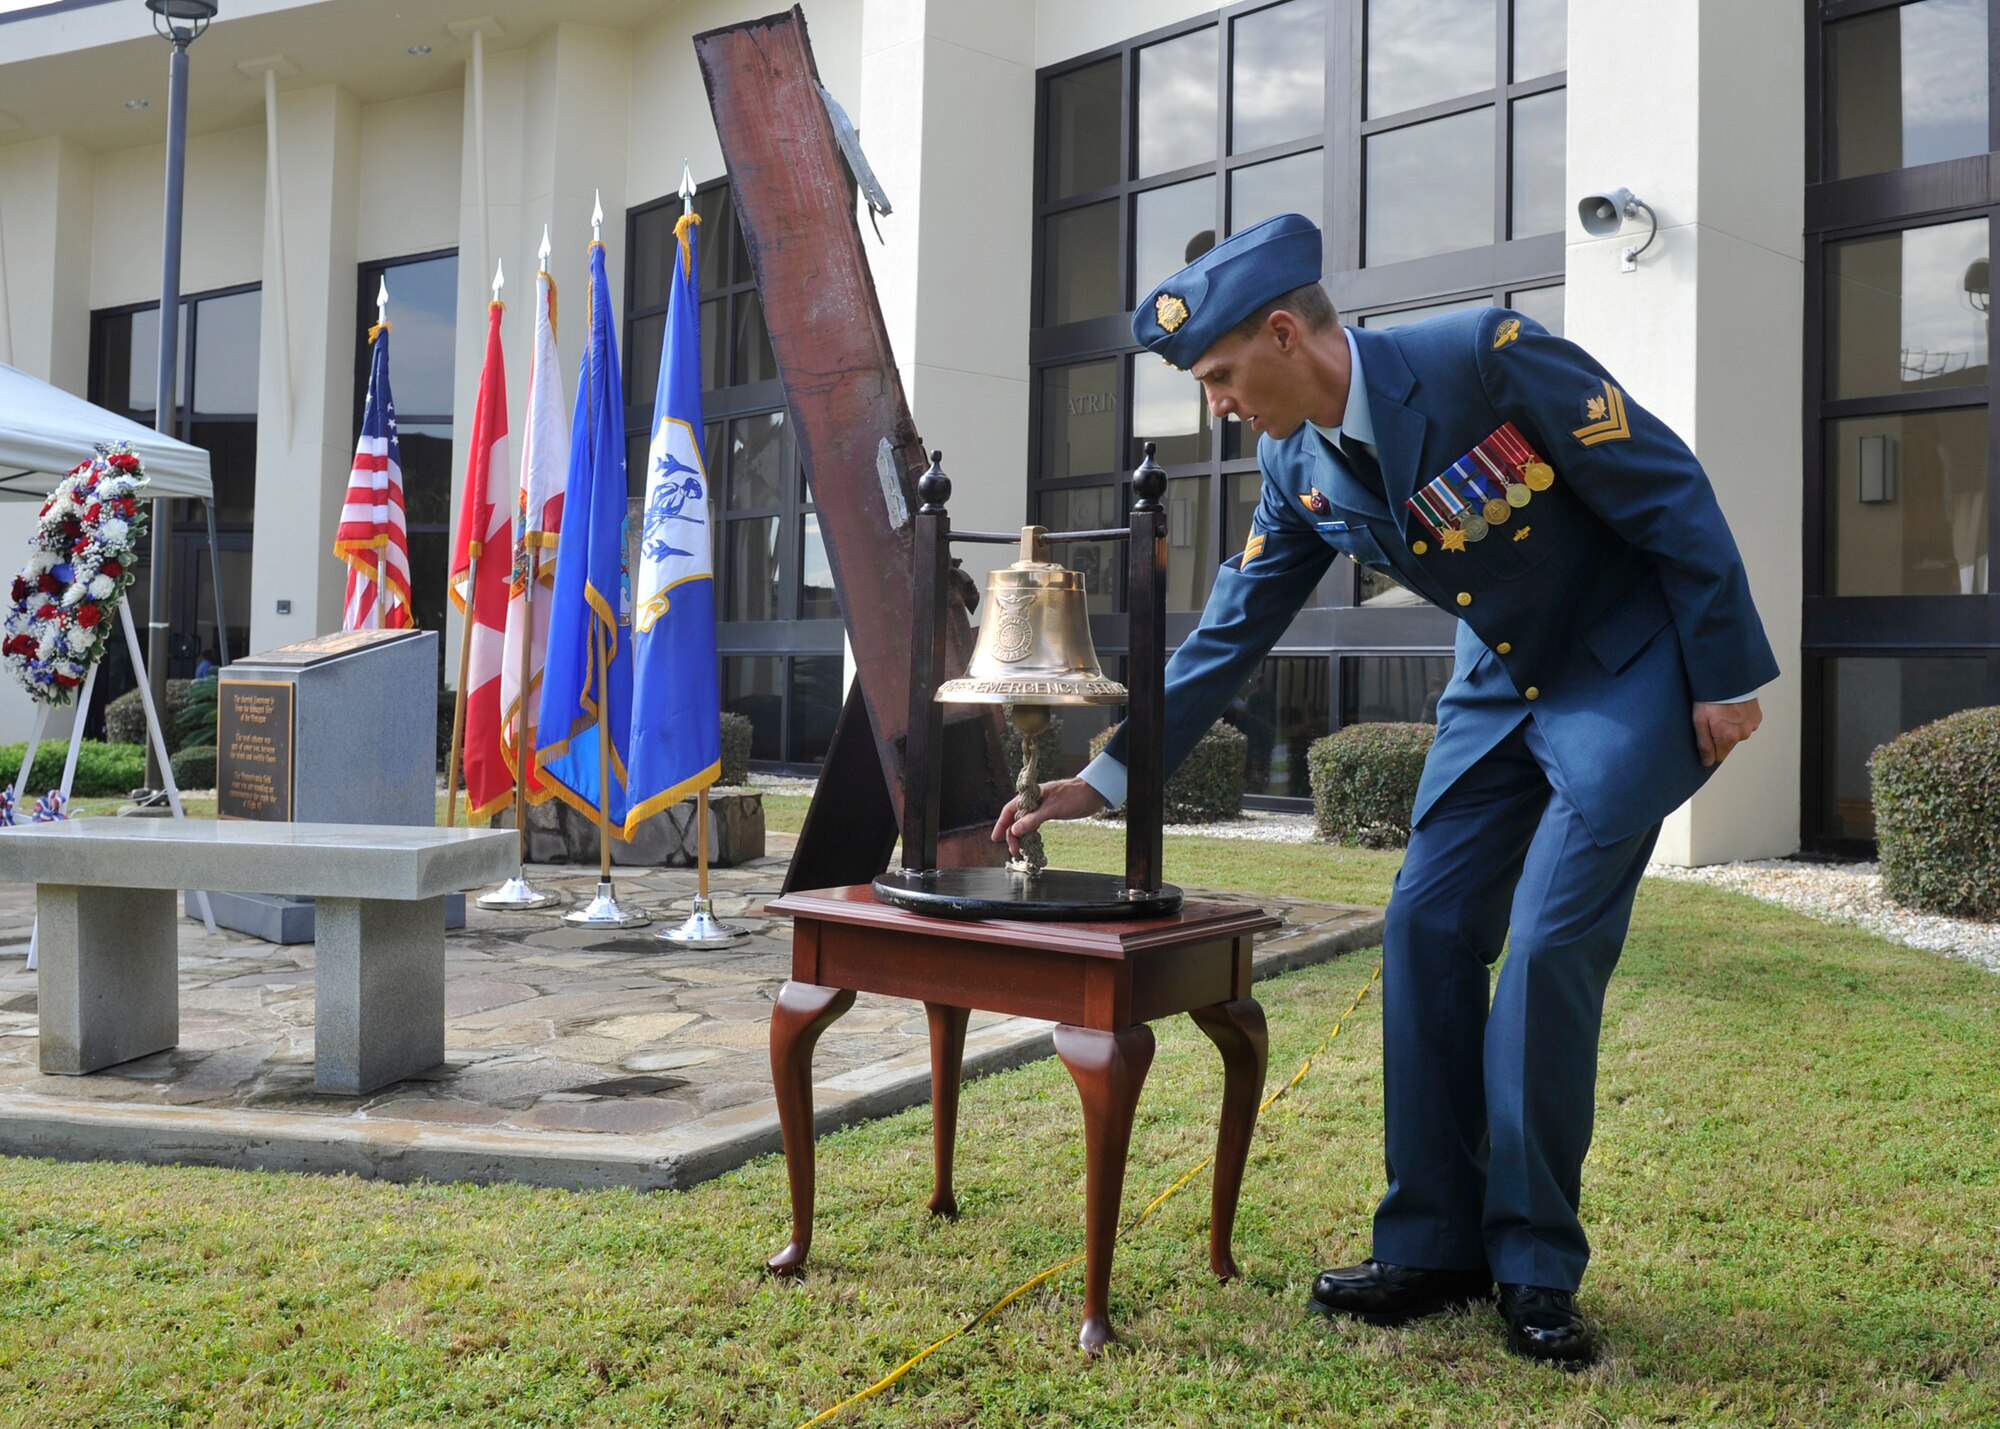 Royal Canadian Air Force Master Cpl. Craig Robertson, 101st Air Communications Squadron, tolls a ceremonial bell during the 9/11 remembrance ceremony at the 601st Air and Space Operations Center. The ceremony was held to honor and remember all who were affected by the tragic events of that 9/11. (U.S. Air Force Photo by Airman 1st Class Sergio A. Gamboa/Released)